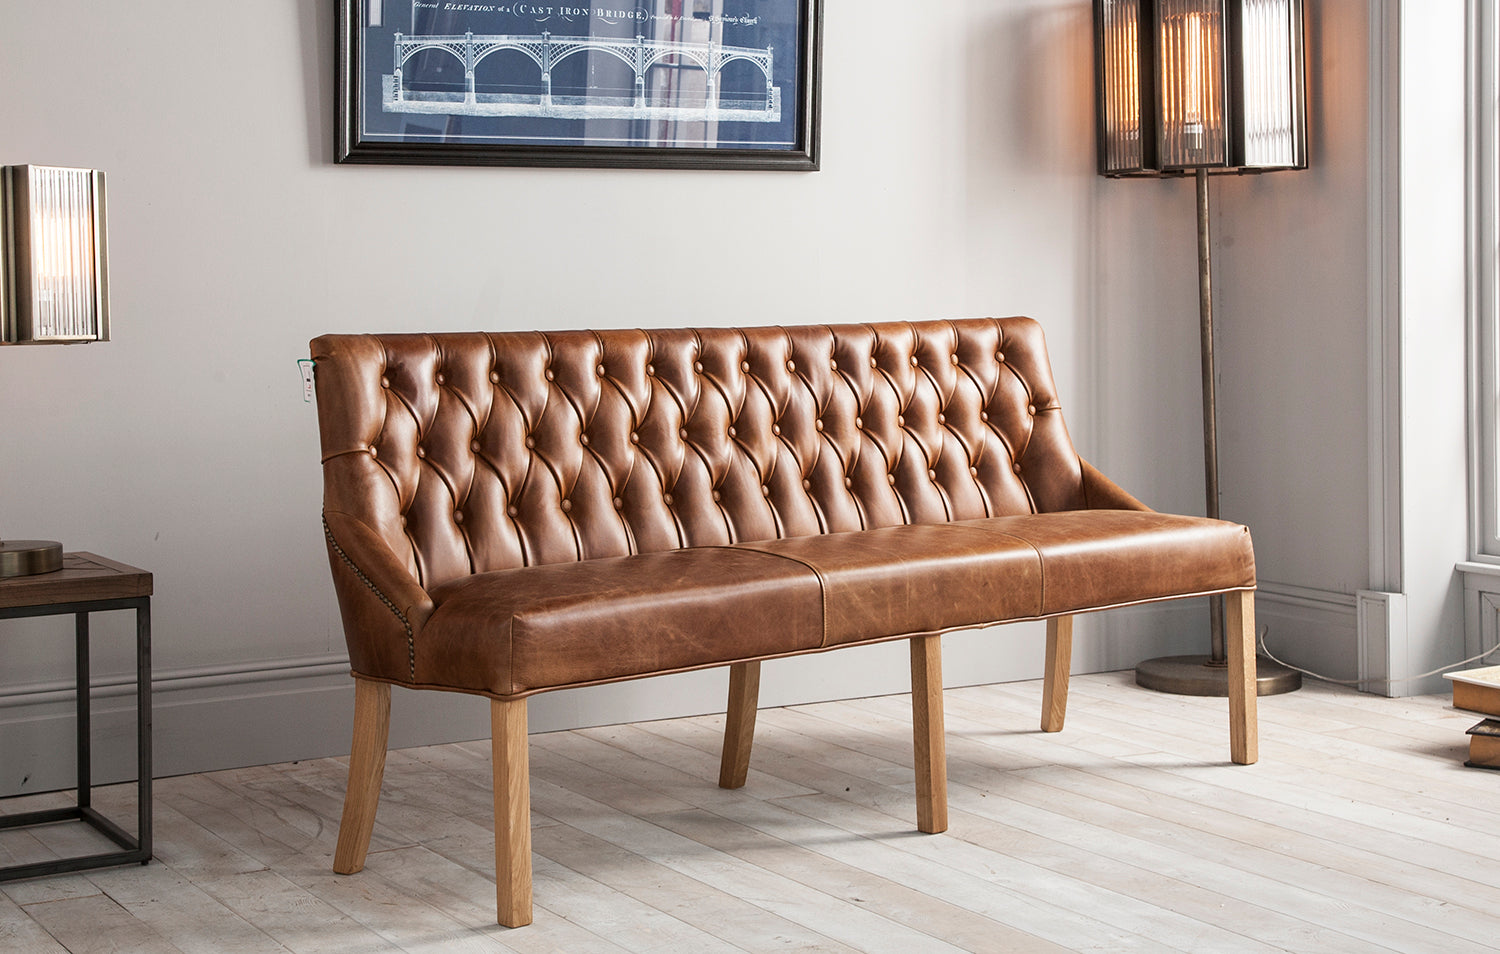 Stanton Benches available from Top Secret Furniture Outlet, Holmes Chapel, Cheshire CW4 8AF